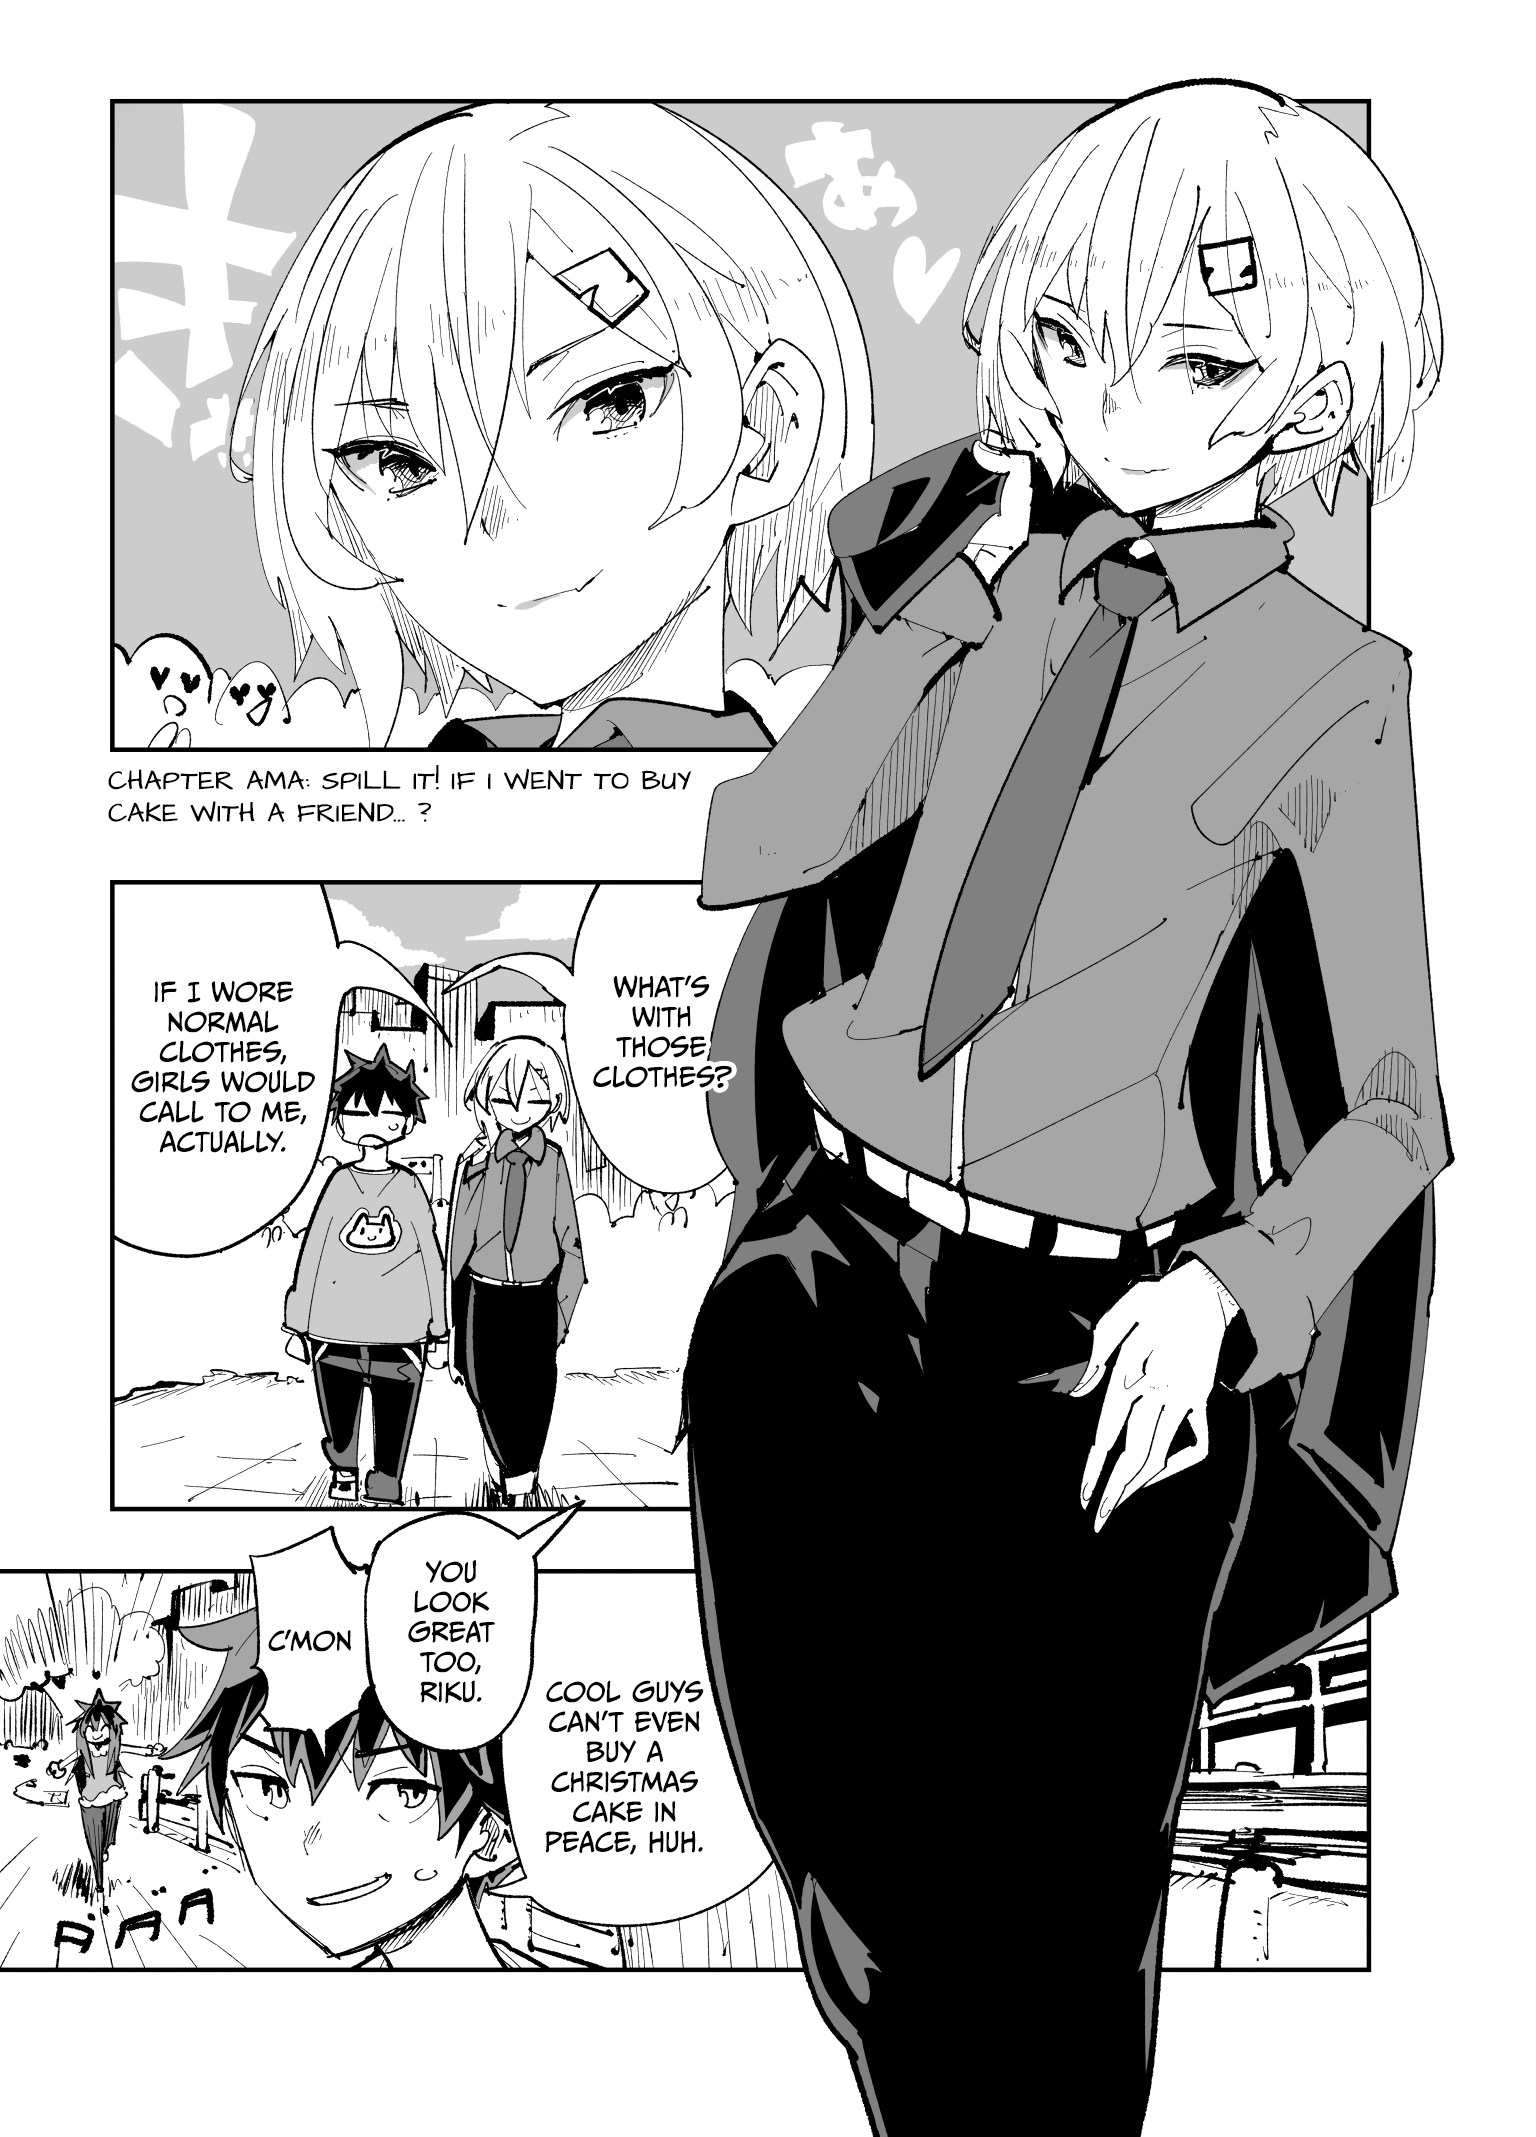 Spill It, Cocktail Knights! Chapter 23: Chapter Ama: Spill It! If I Went To Buy Cake With A Friend...? - Picture 1